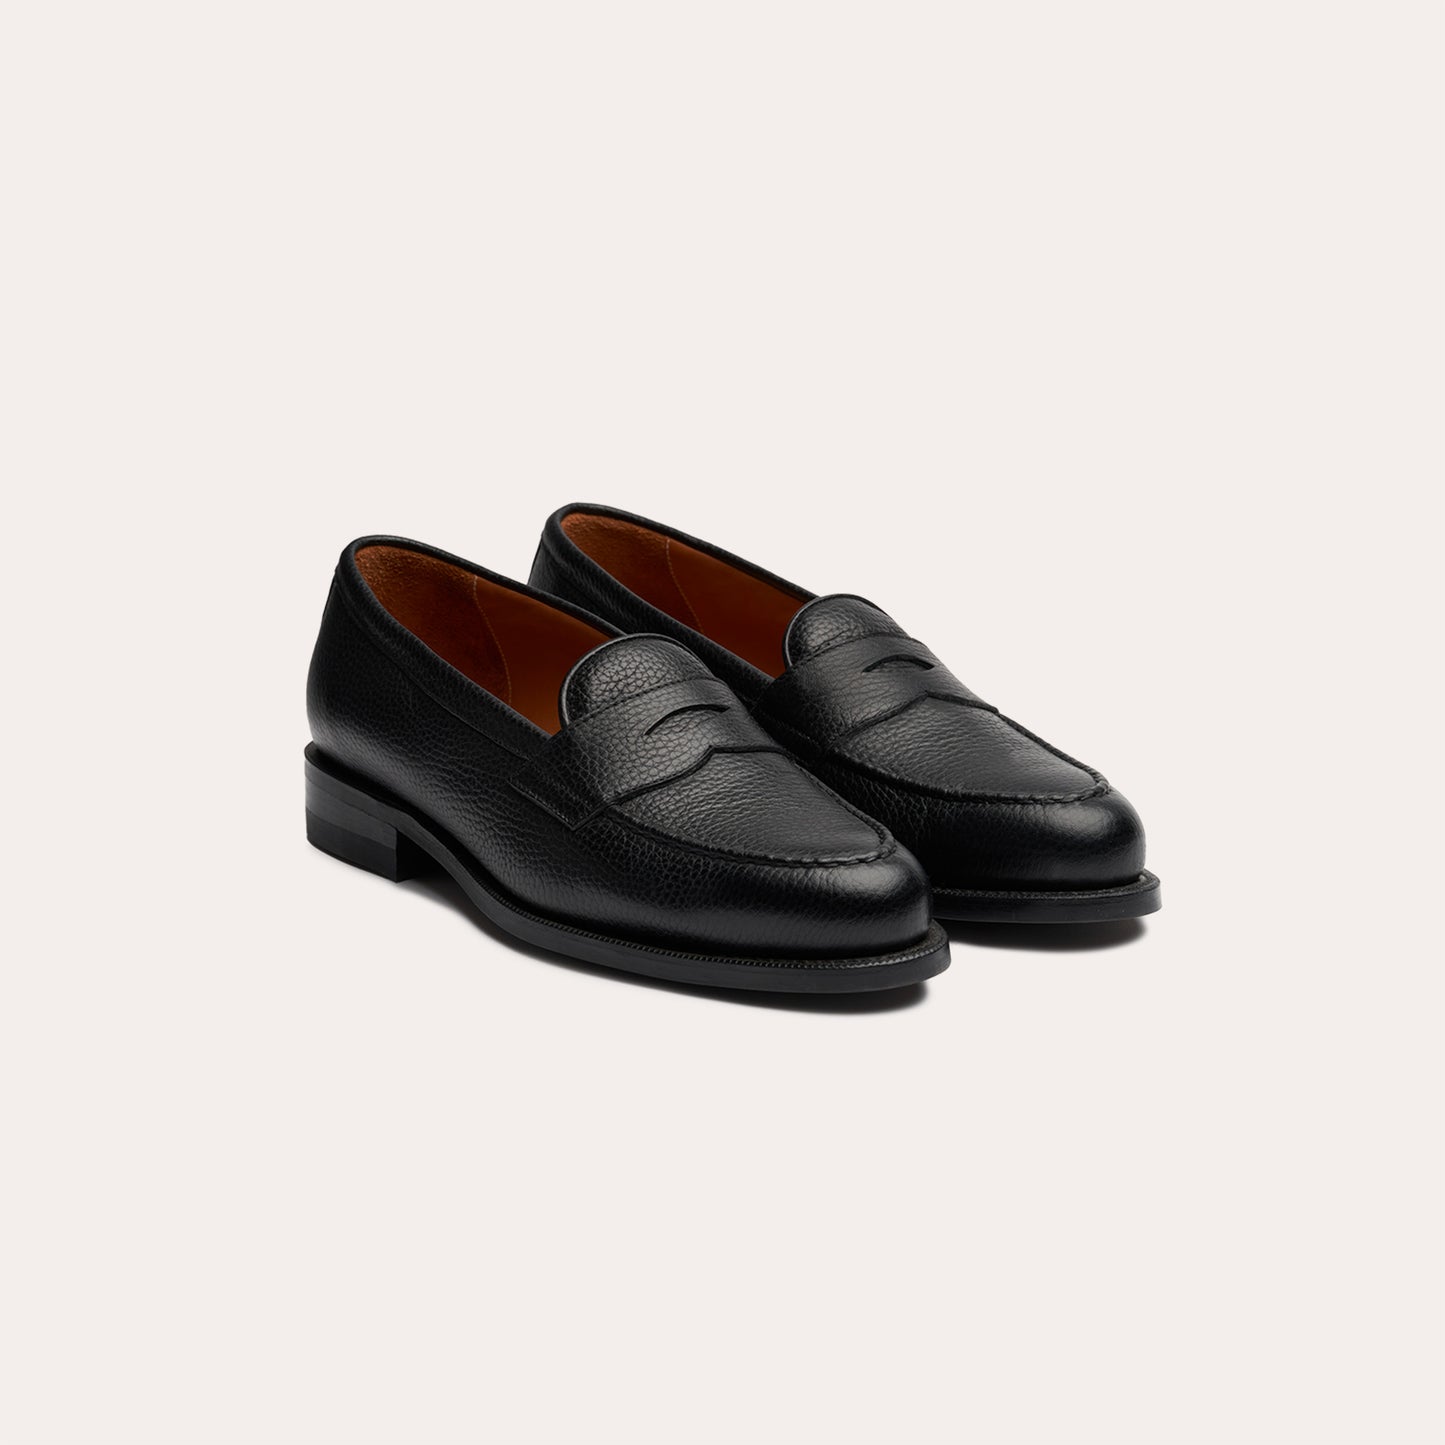 Black grained leather moccasin